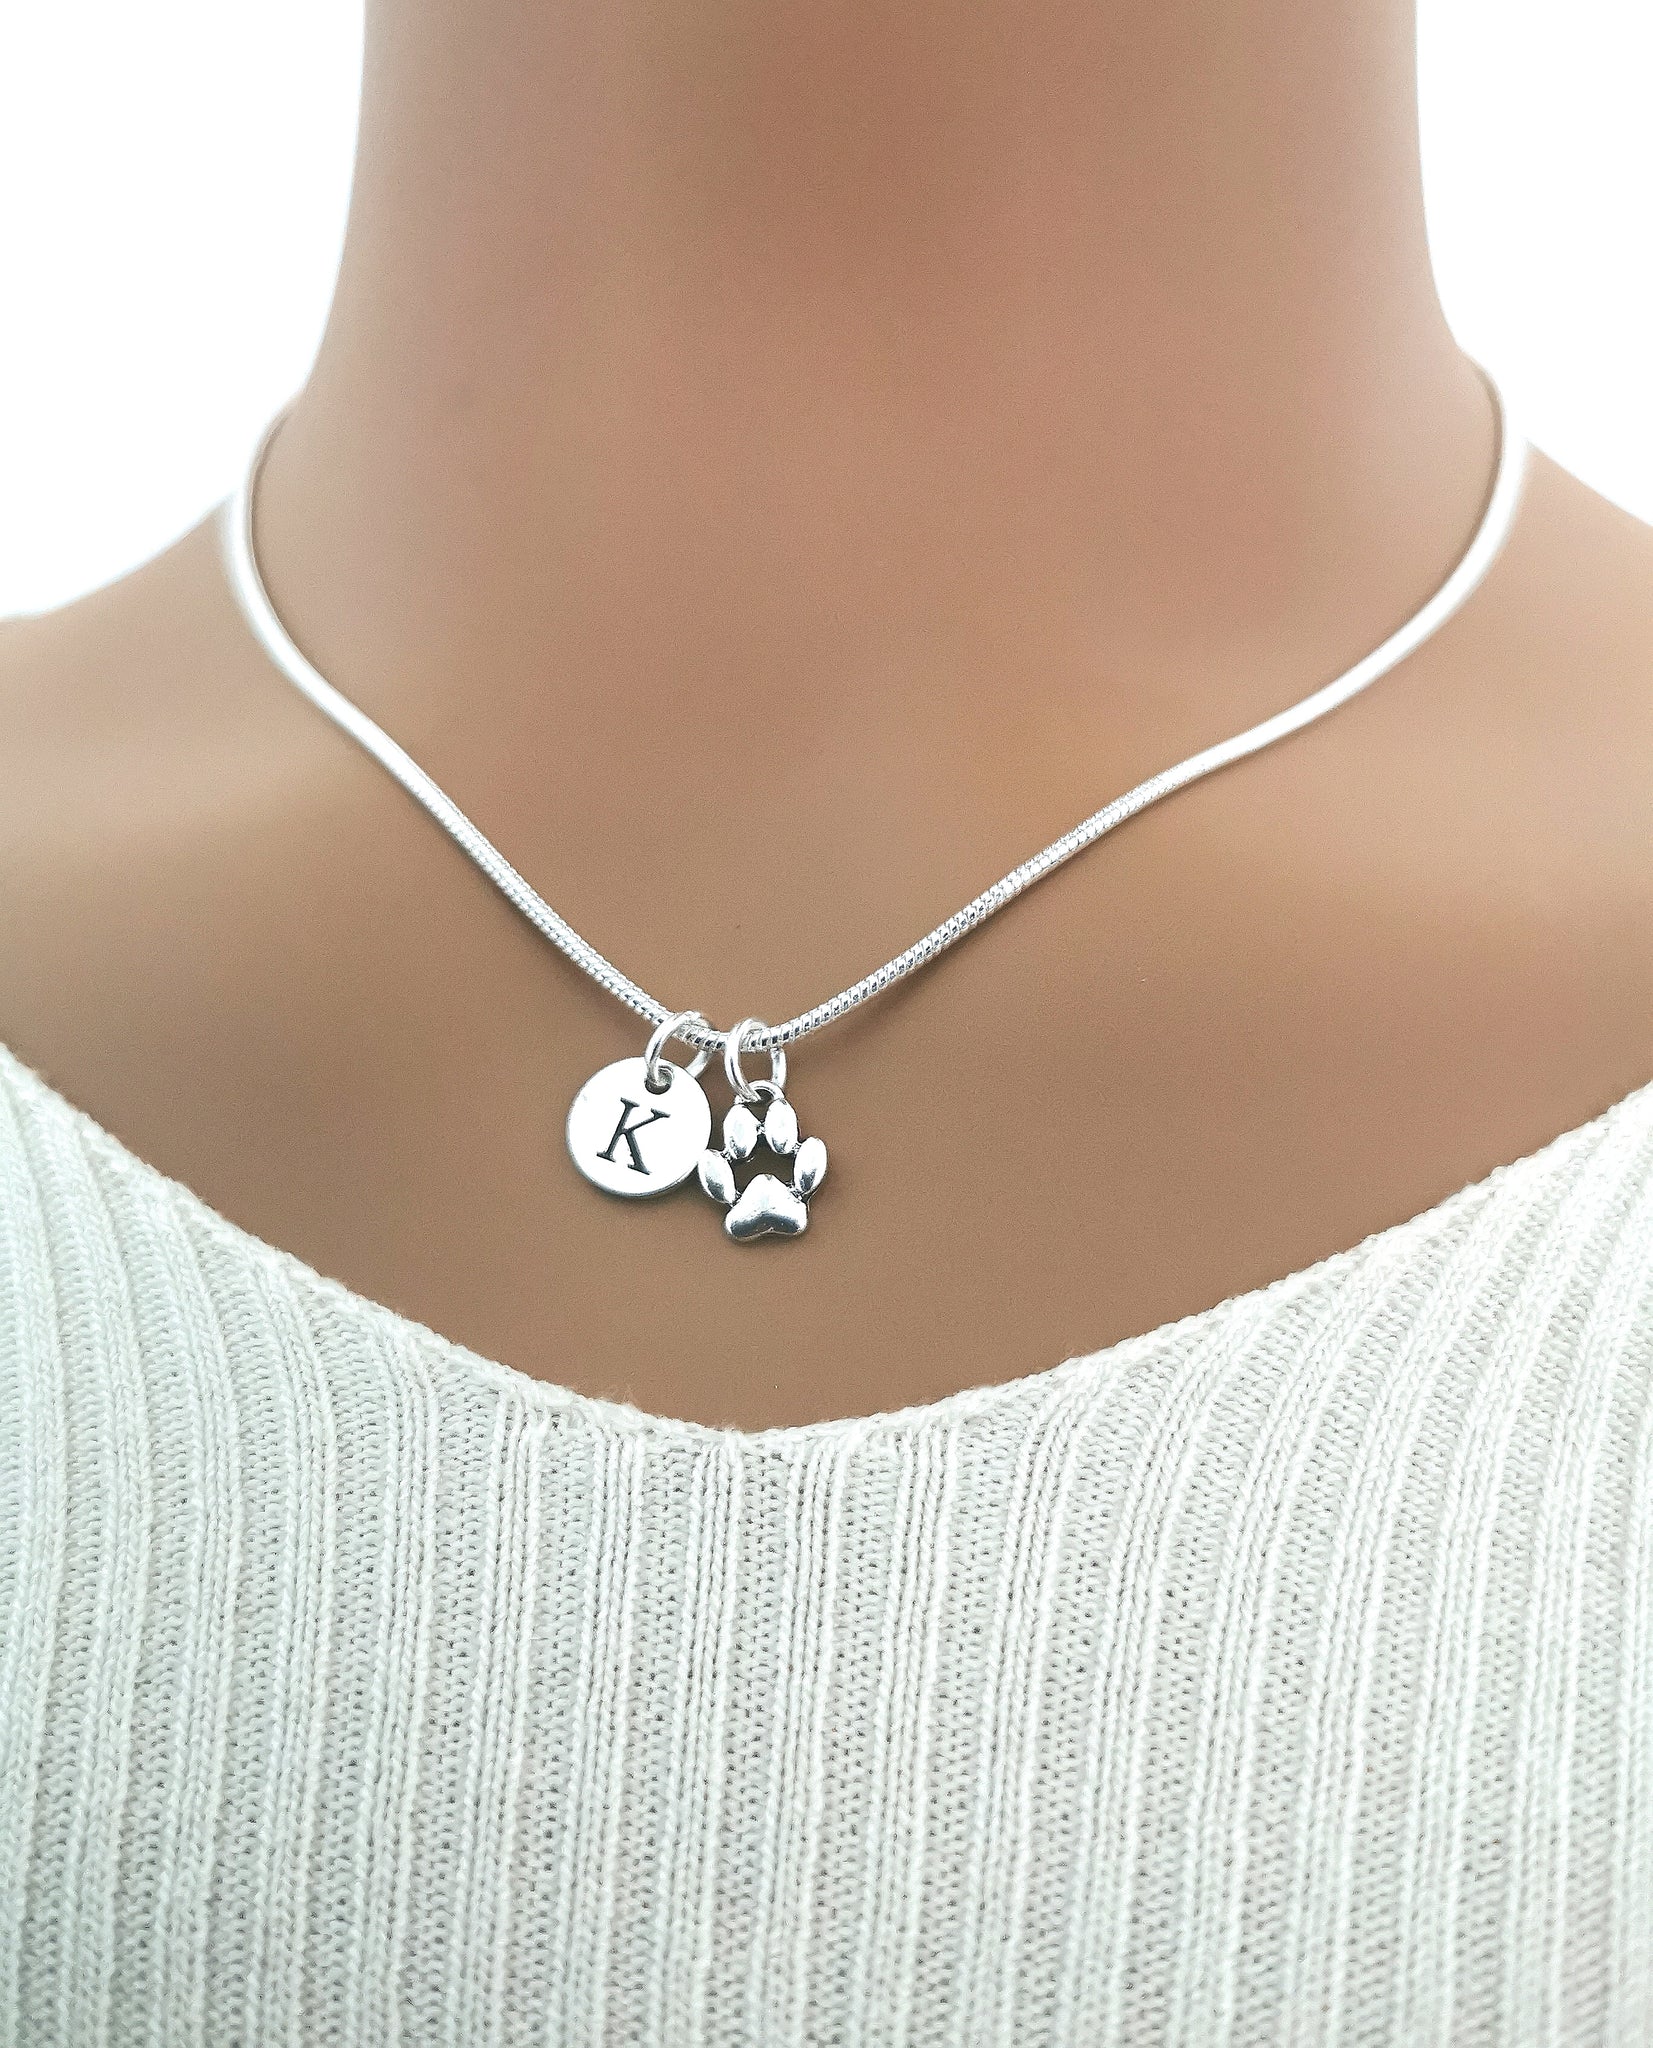 Heartfelt Silver Dog Paw Pet Loss Memorial Necklace - Stylish Charm Gift with 18" length - Perfect for those honoring departed pets - YouLoveYouShop.